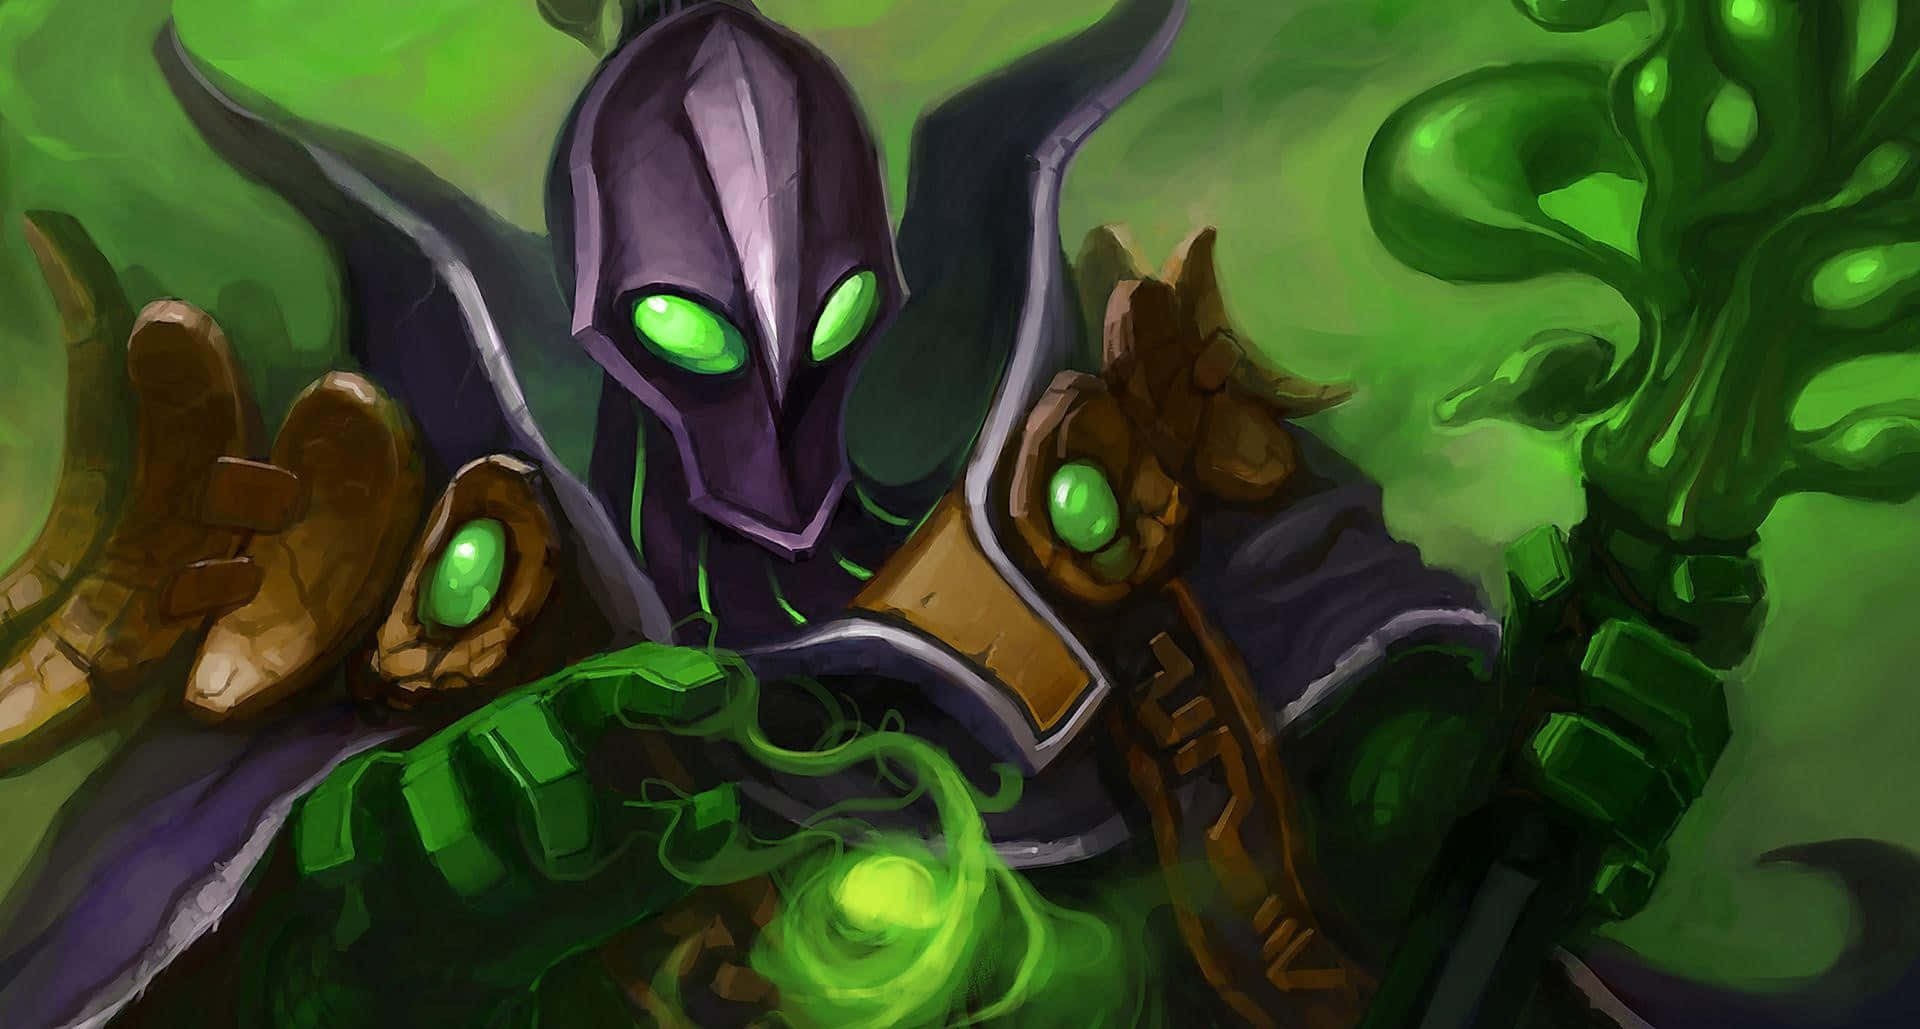 The Master of the Mystical Arts – Rubick in Action Wallpaper